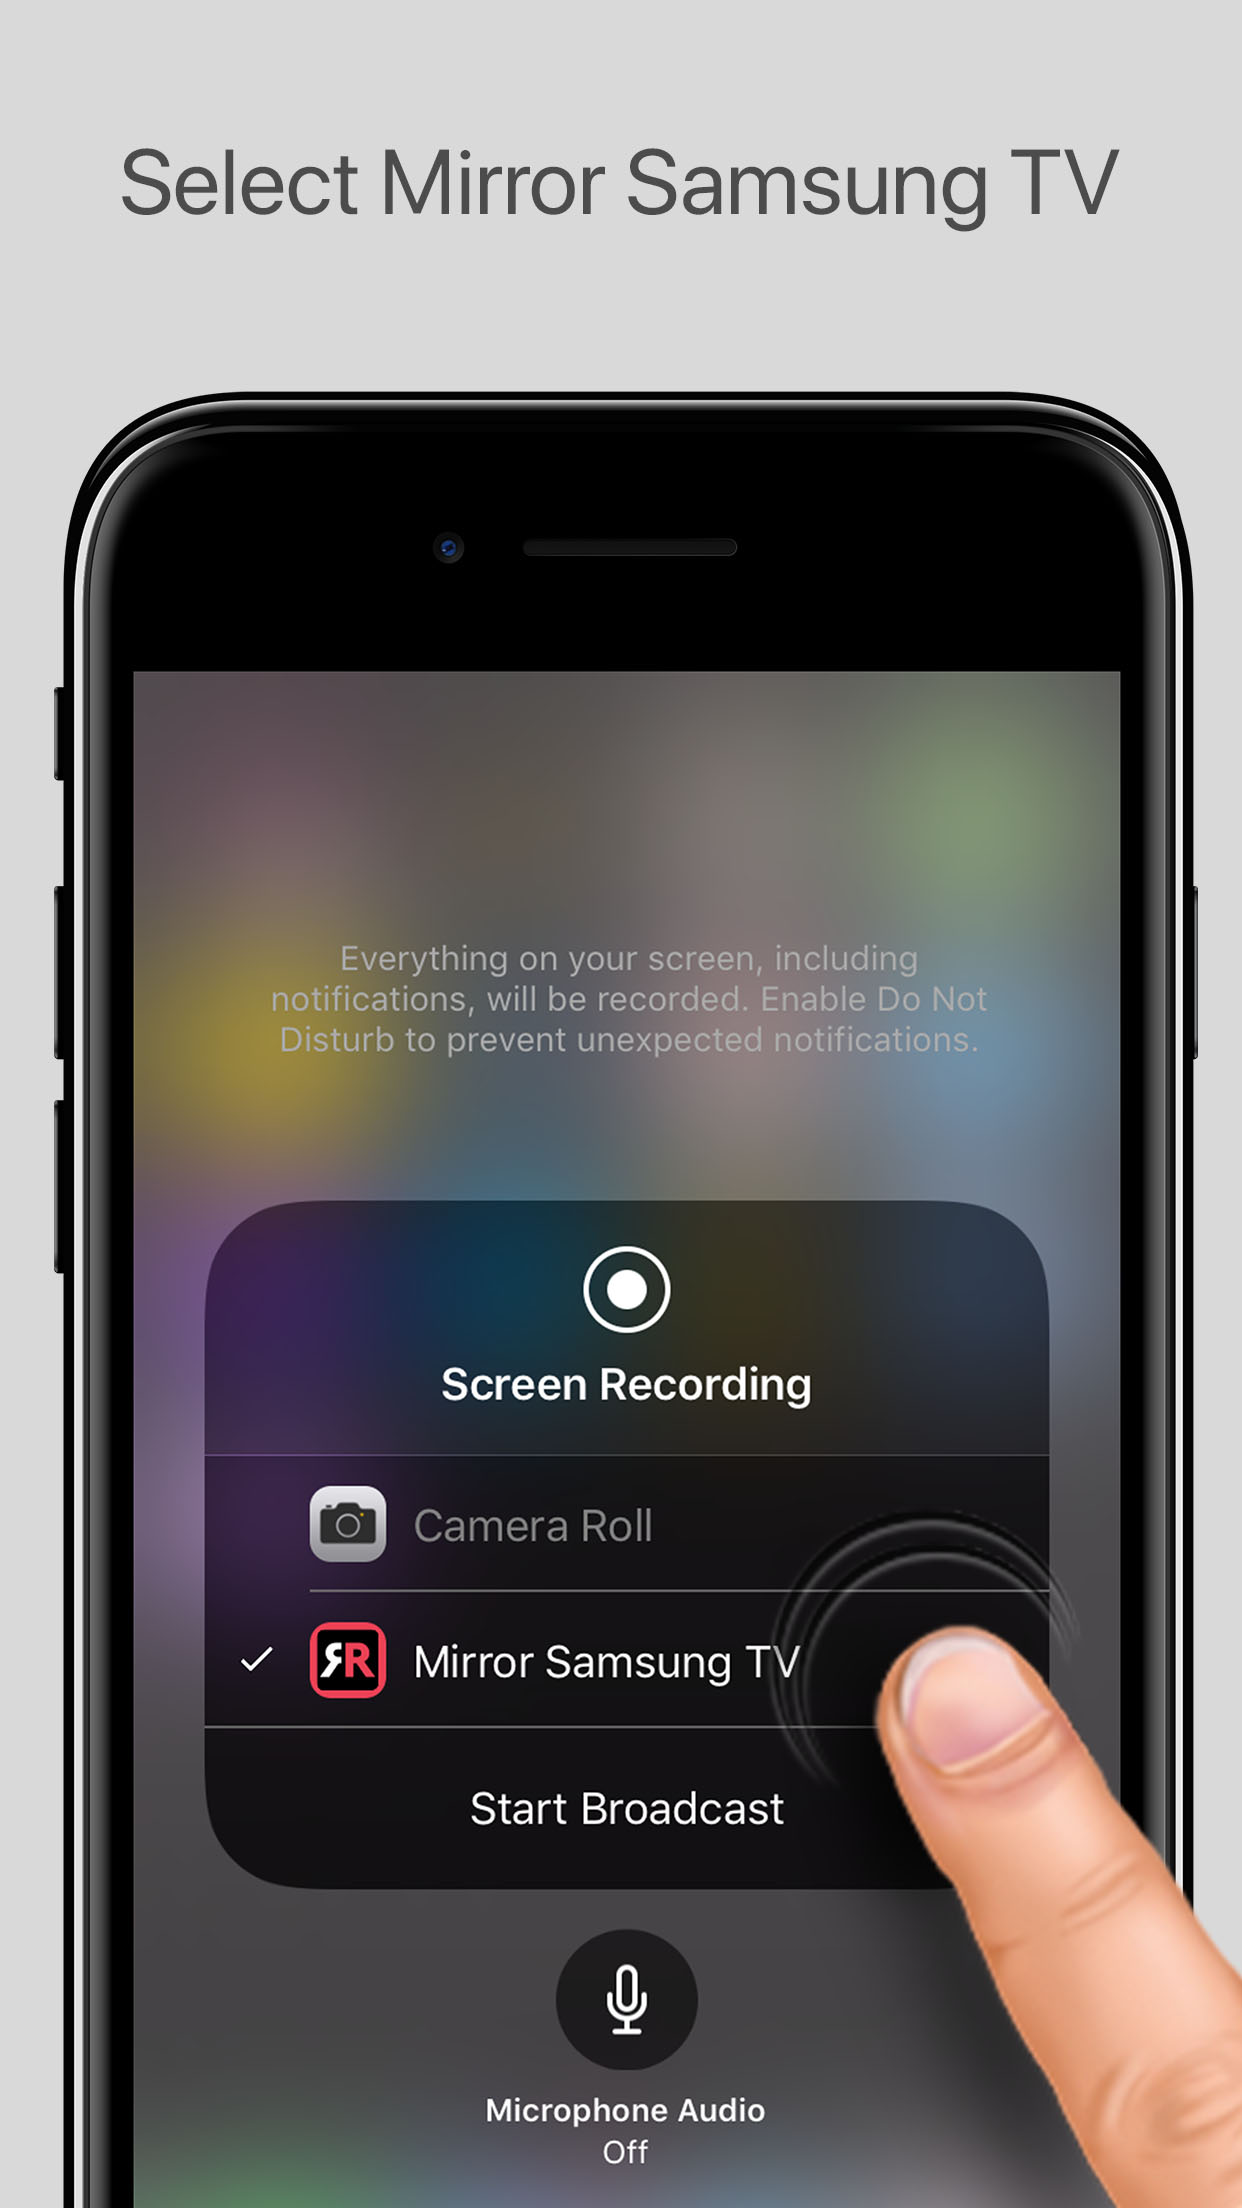 Mirror Your Iphone Or Ipad On A Smart Tv, Apple Screen Mirroring On Smart Tv